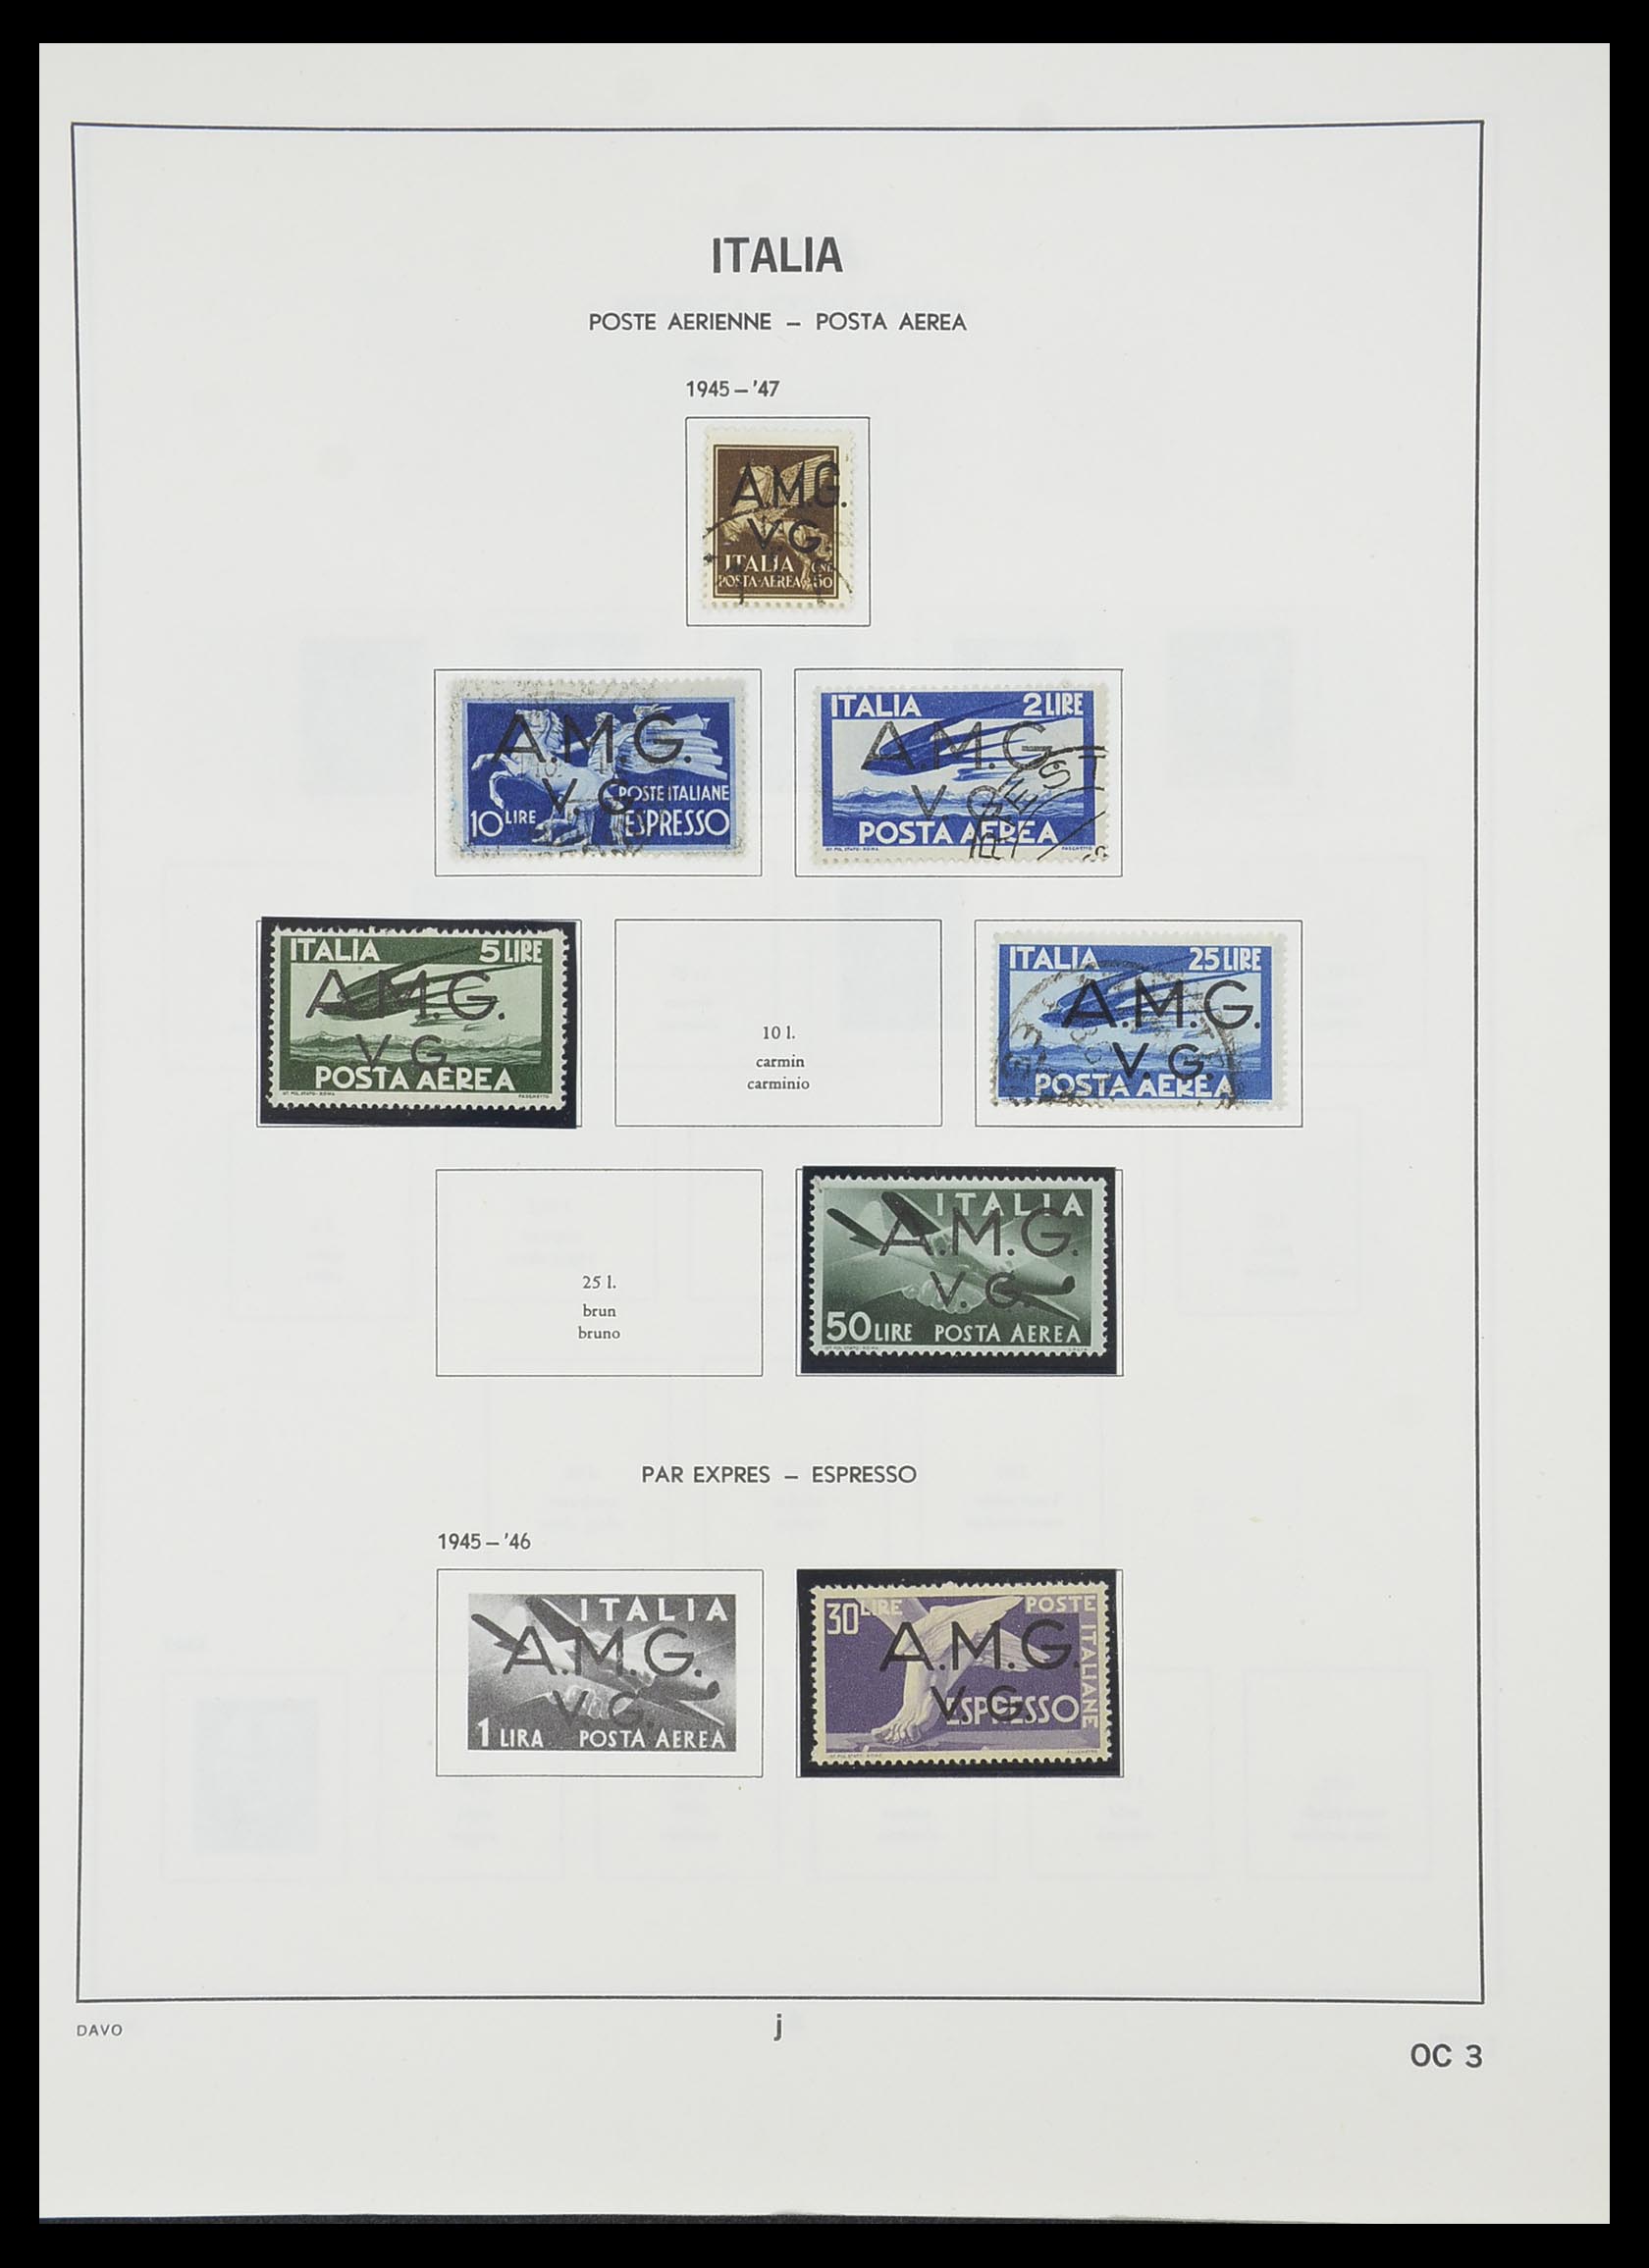 33413 229 - Stamp collection 33413 Italy 1945-2000.